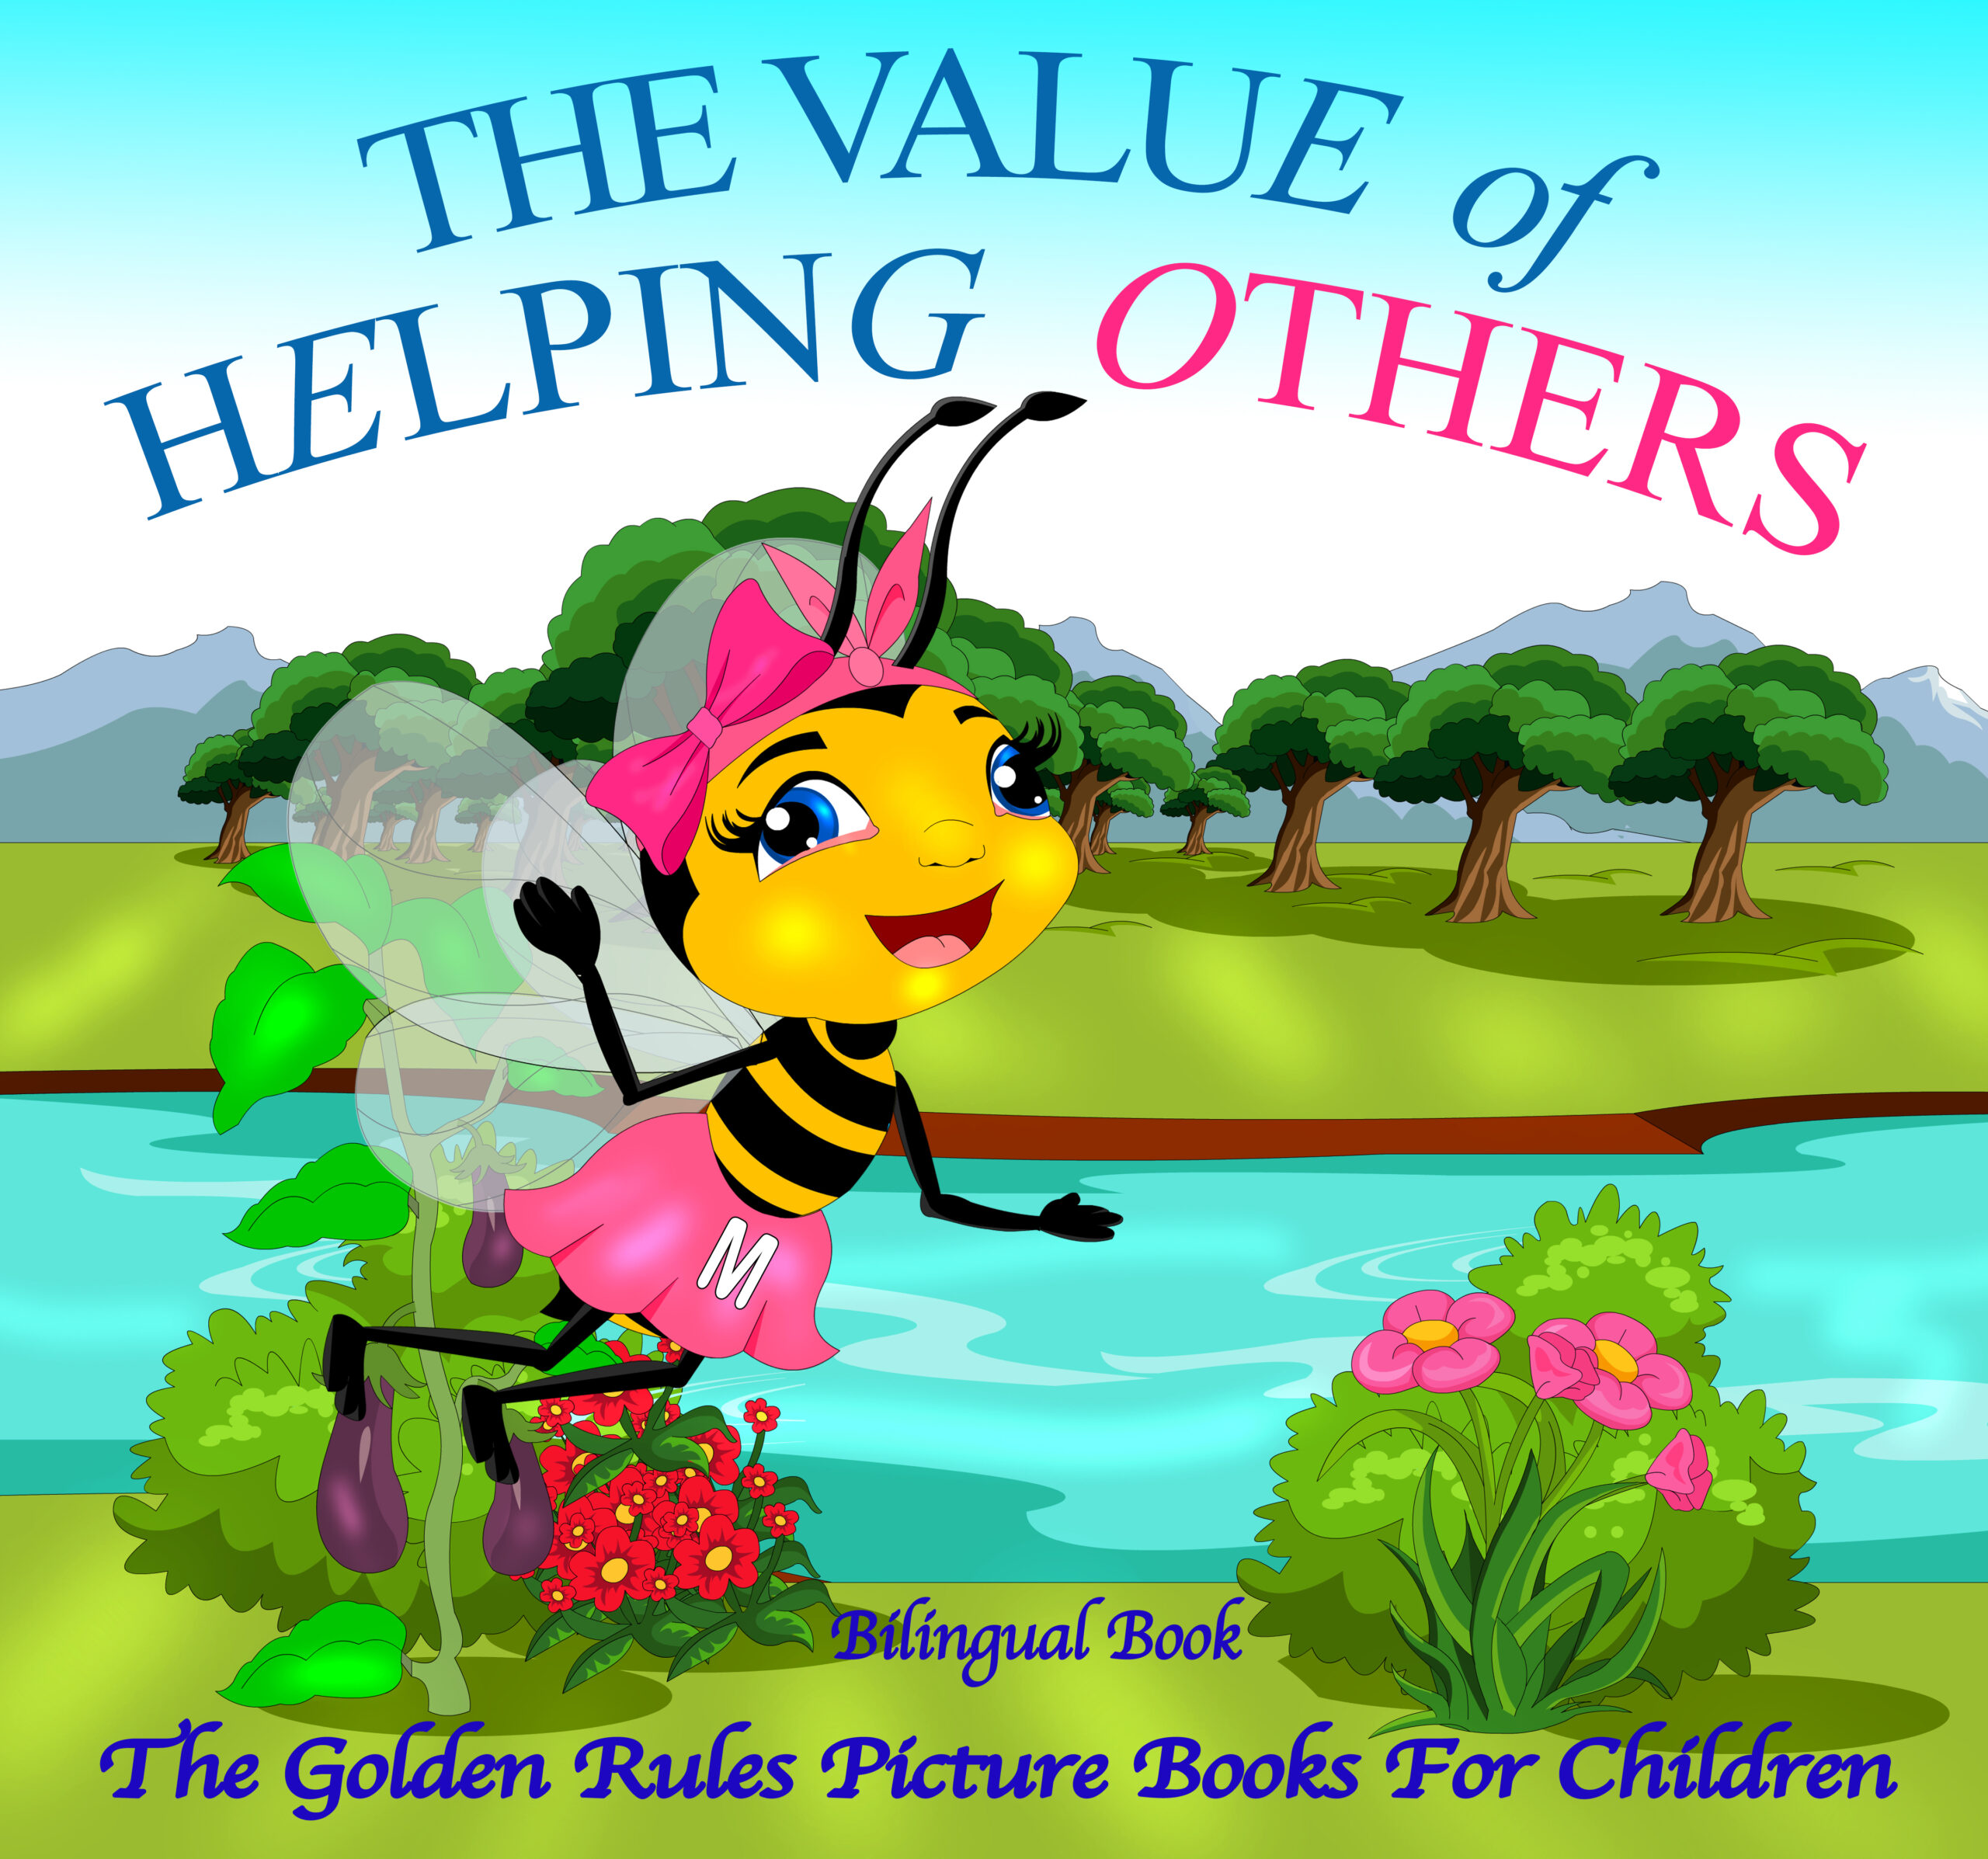 FREE: The Value of Helping Others by Maria del Pilar Pla